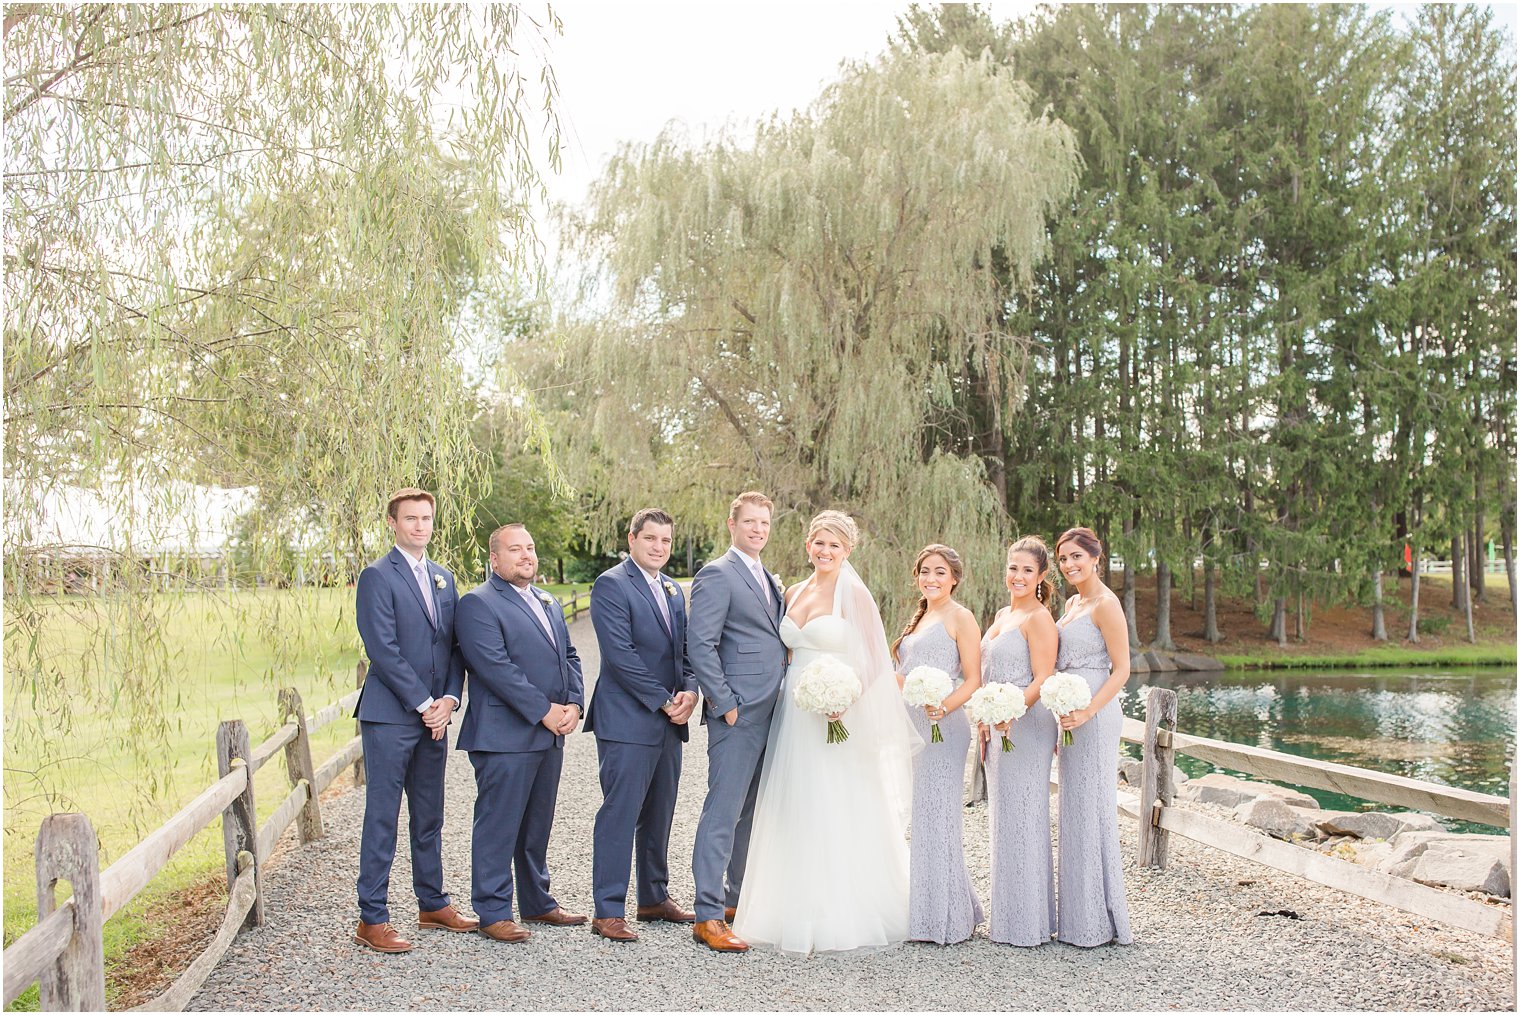 Bridal party photo by the willow trees at Windows on the Water at Frogbridge Wedding